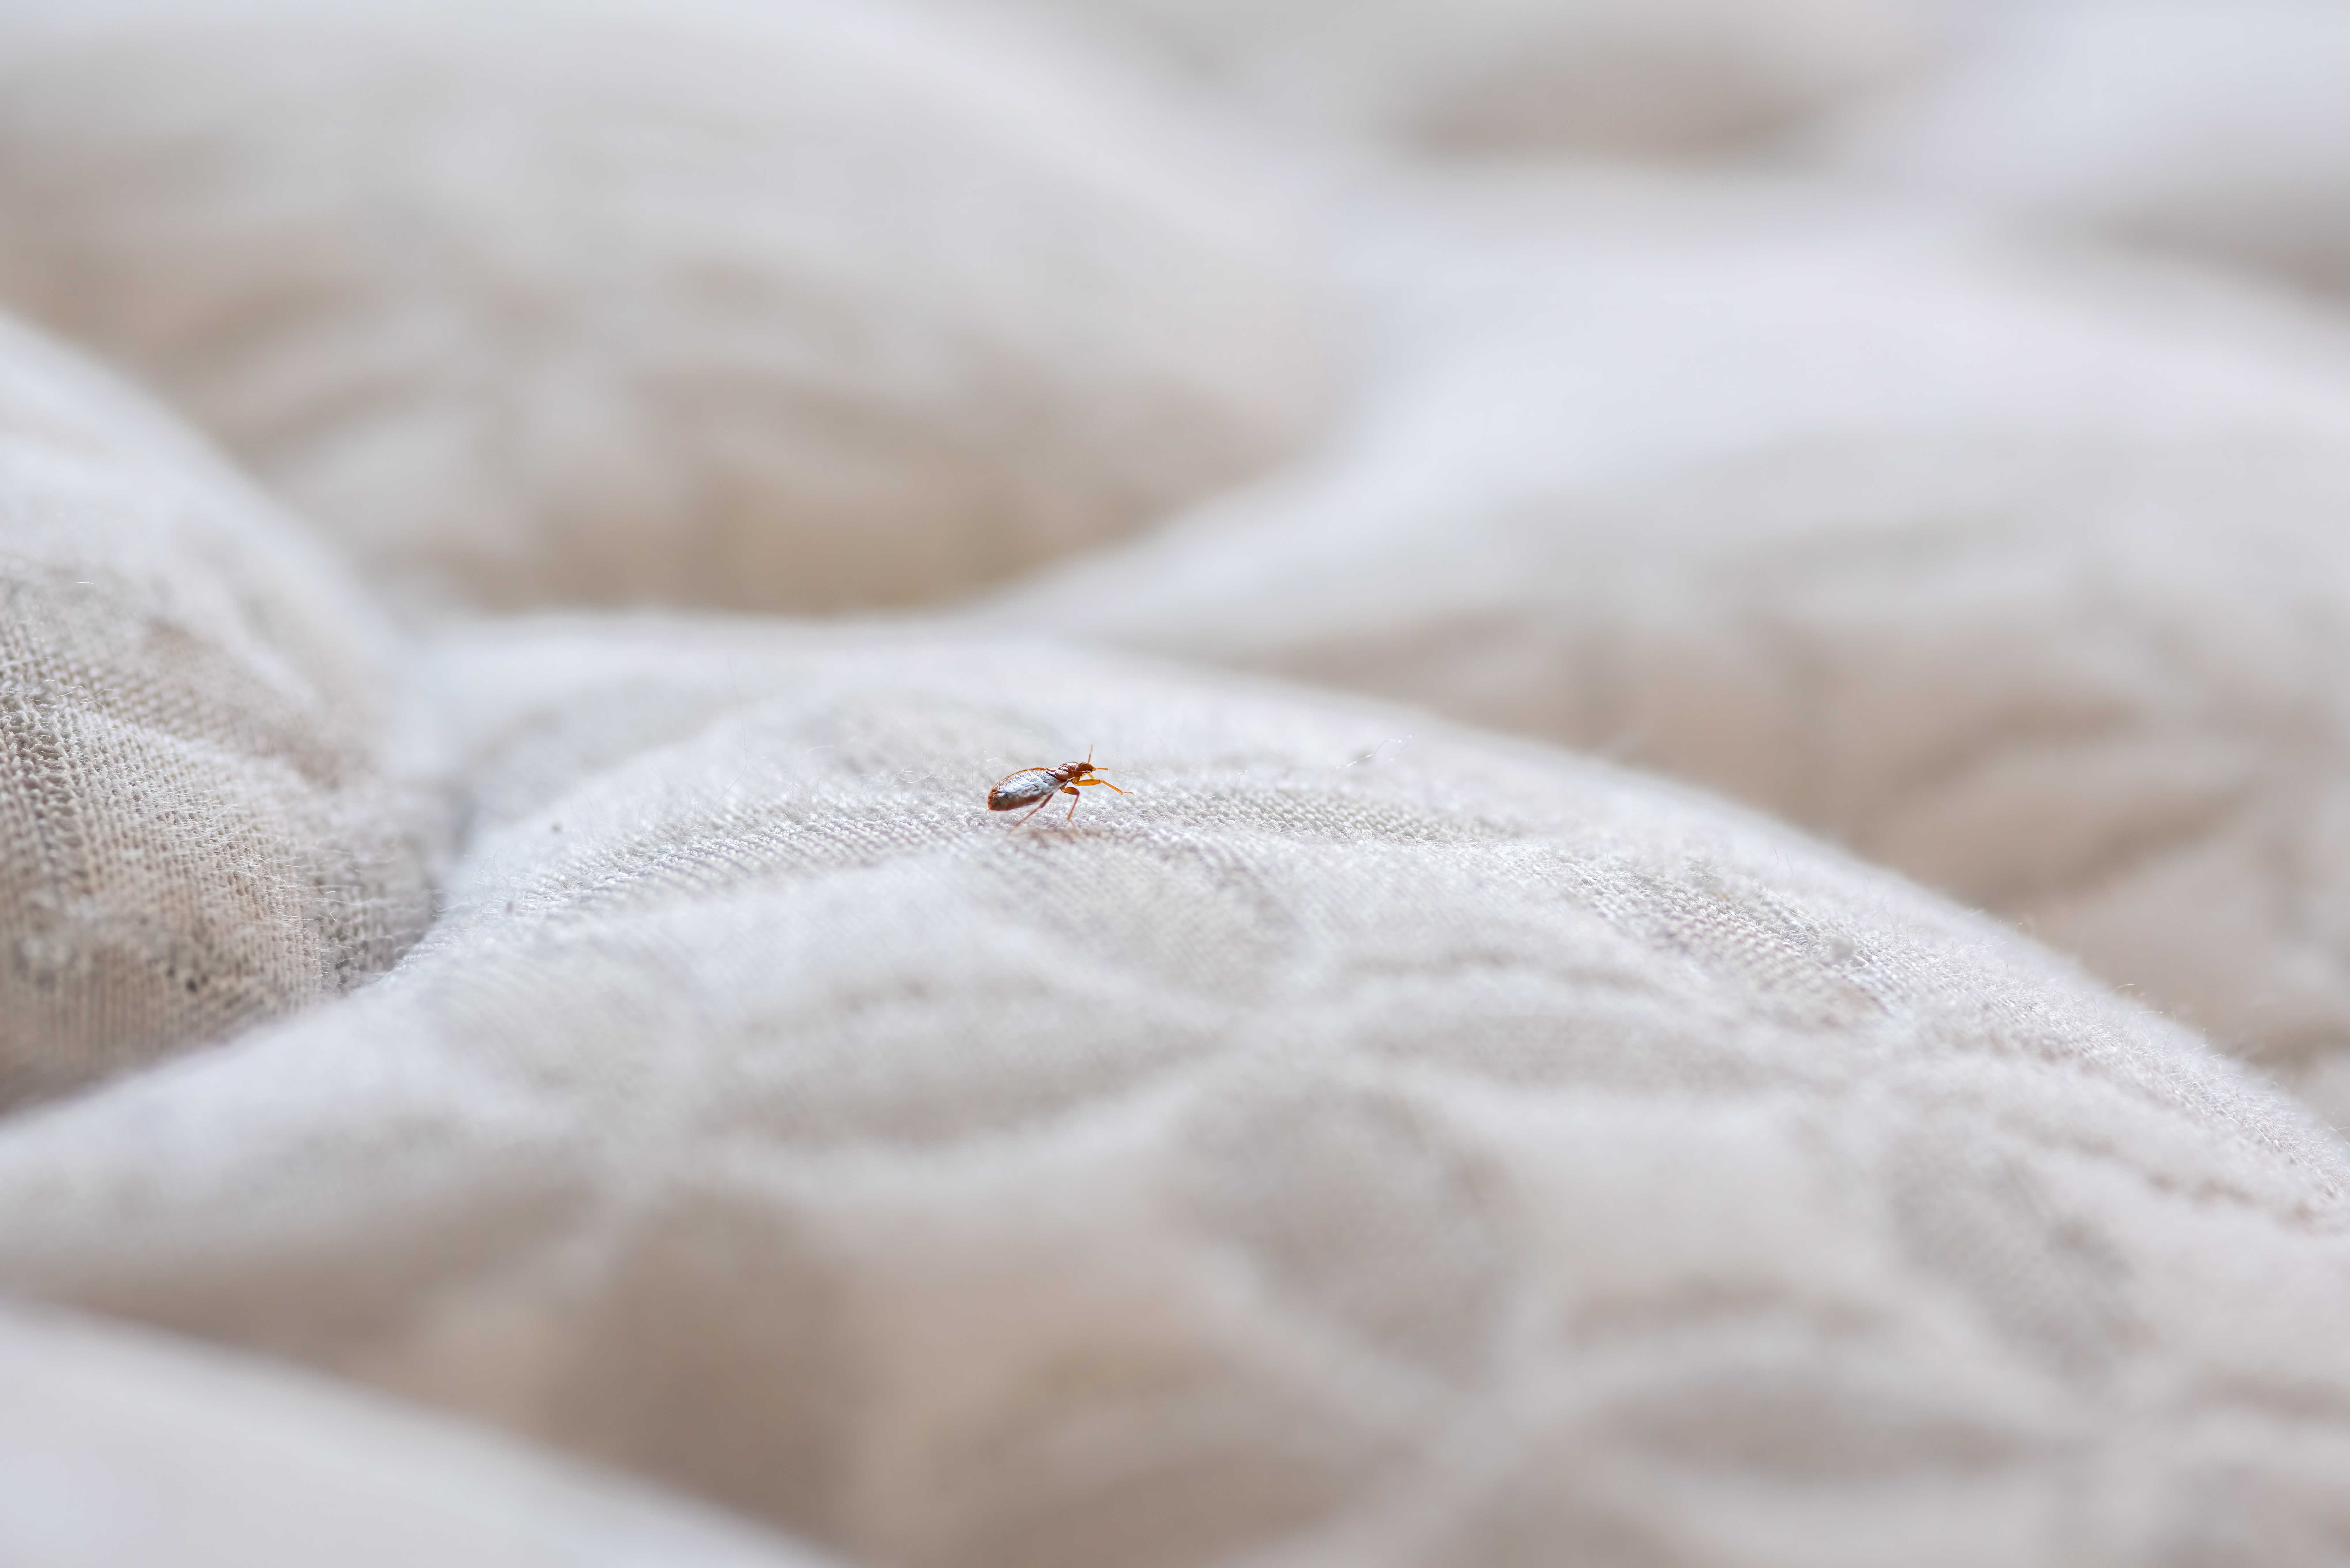 A bed bug on a bed - GGA Pest Management provides bed bug control.